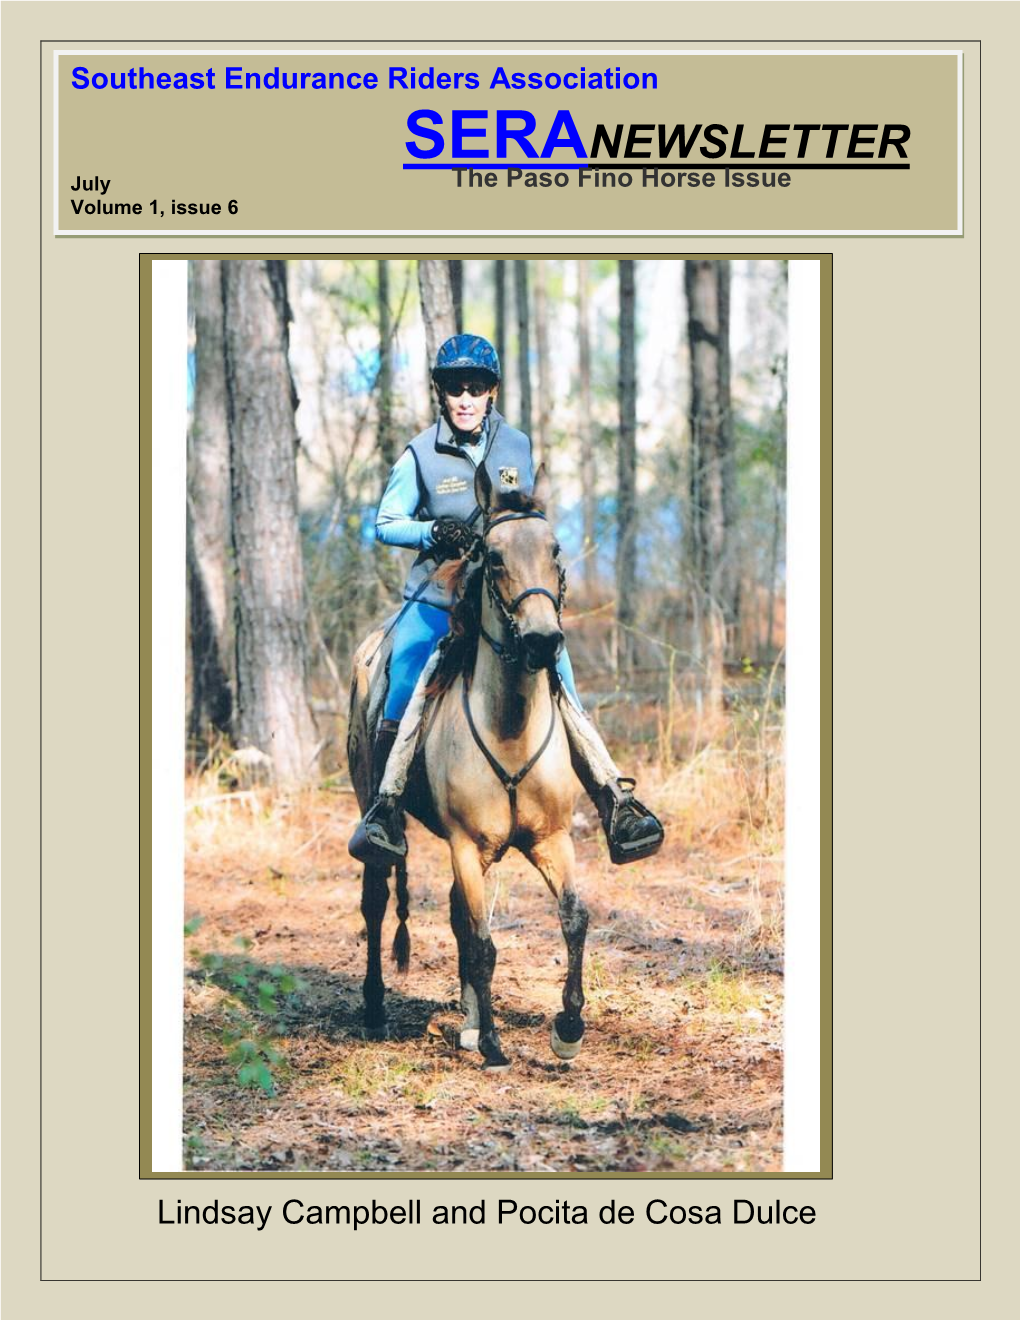 SERANEWSLETTER July the Paso Fino Horse Issue Volume 1, Issue 6